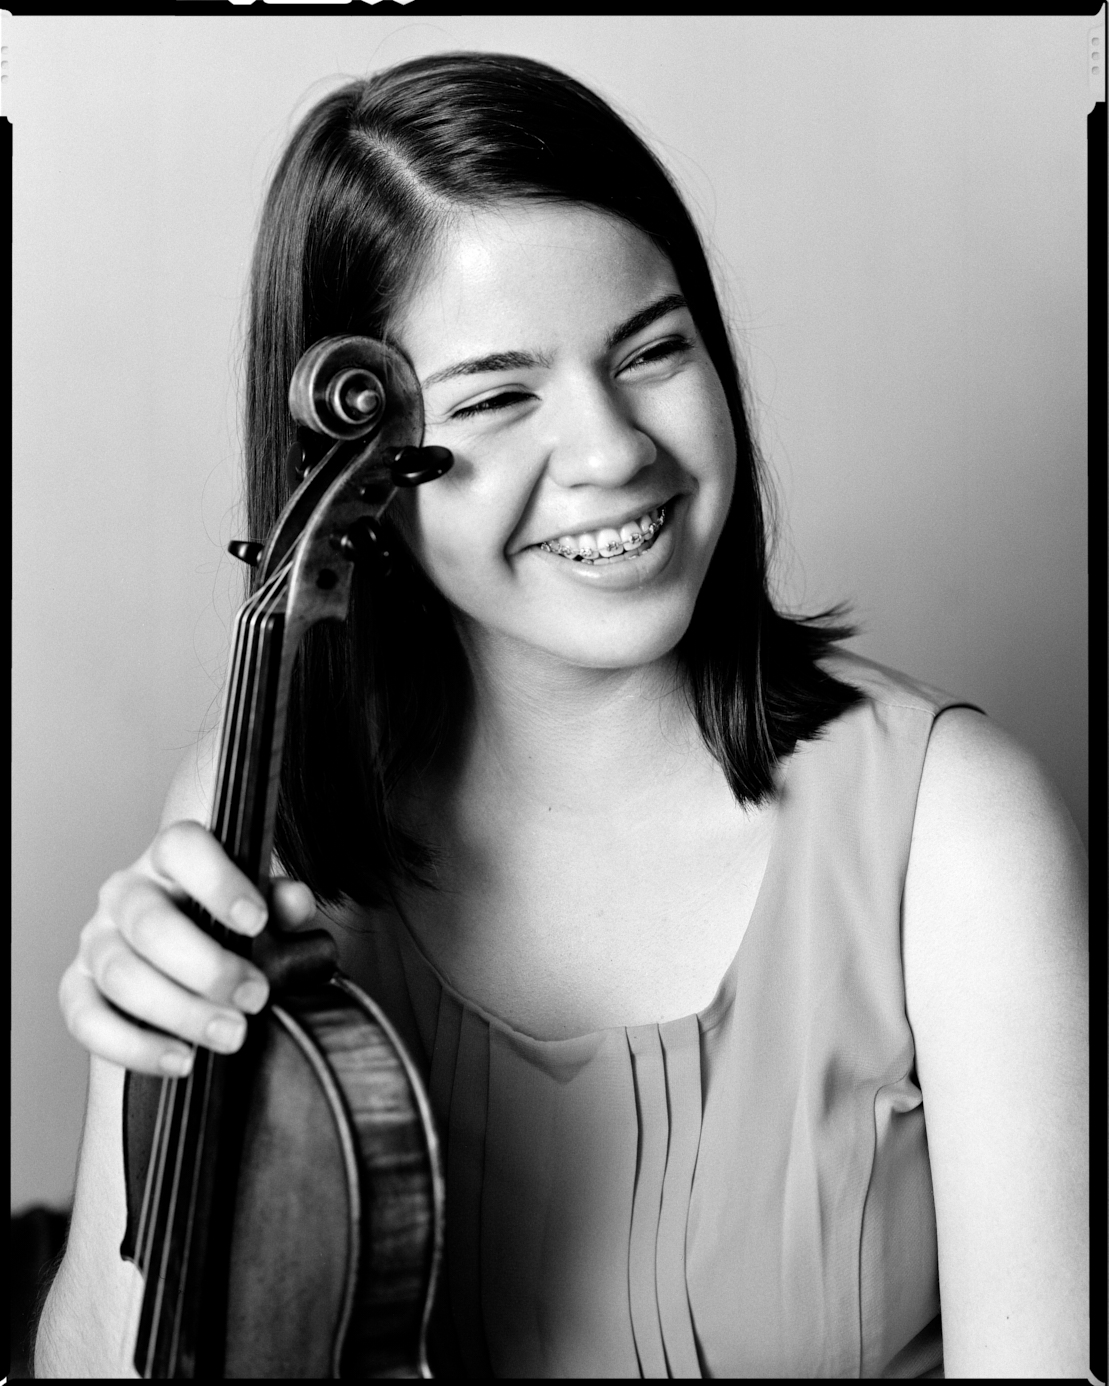 Violinist Anjelina Noh smiles with her violin leaning against her face. Photographed with 4x5 film camera.